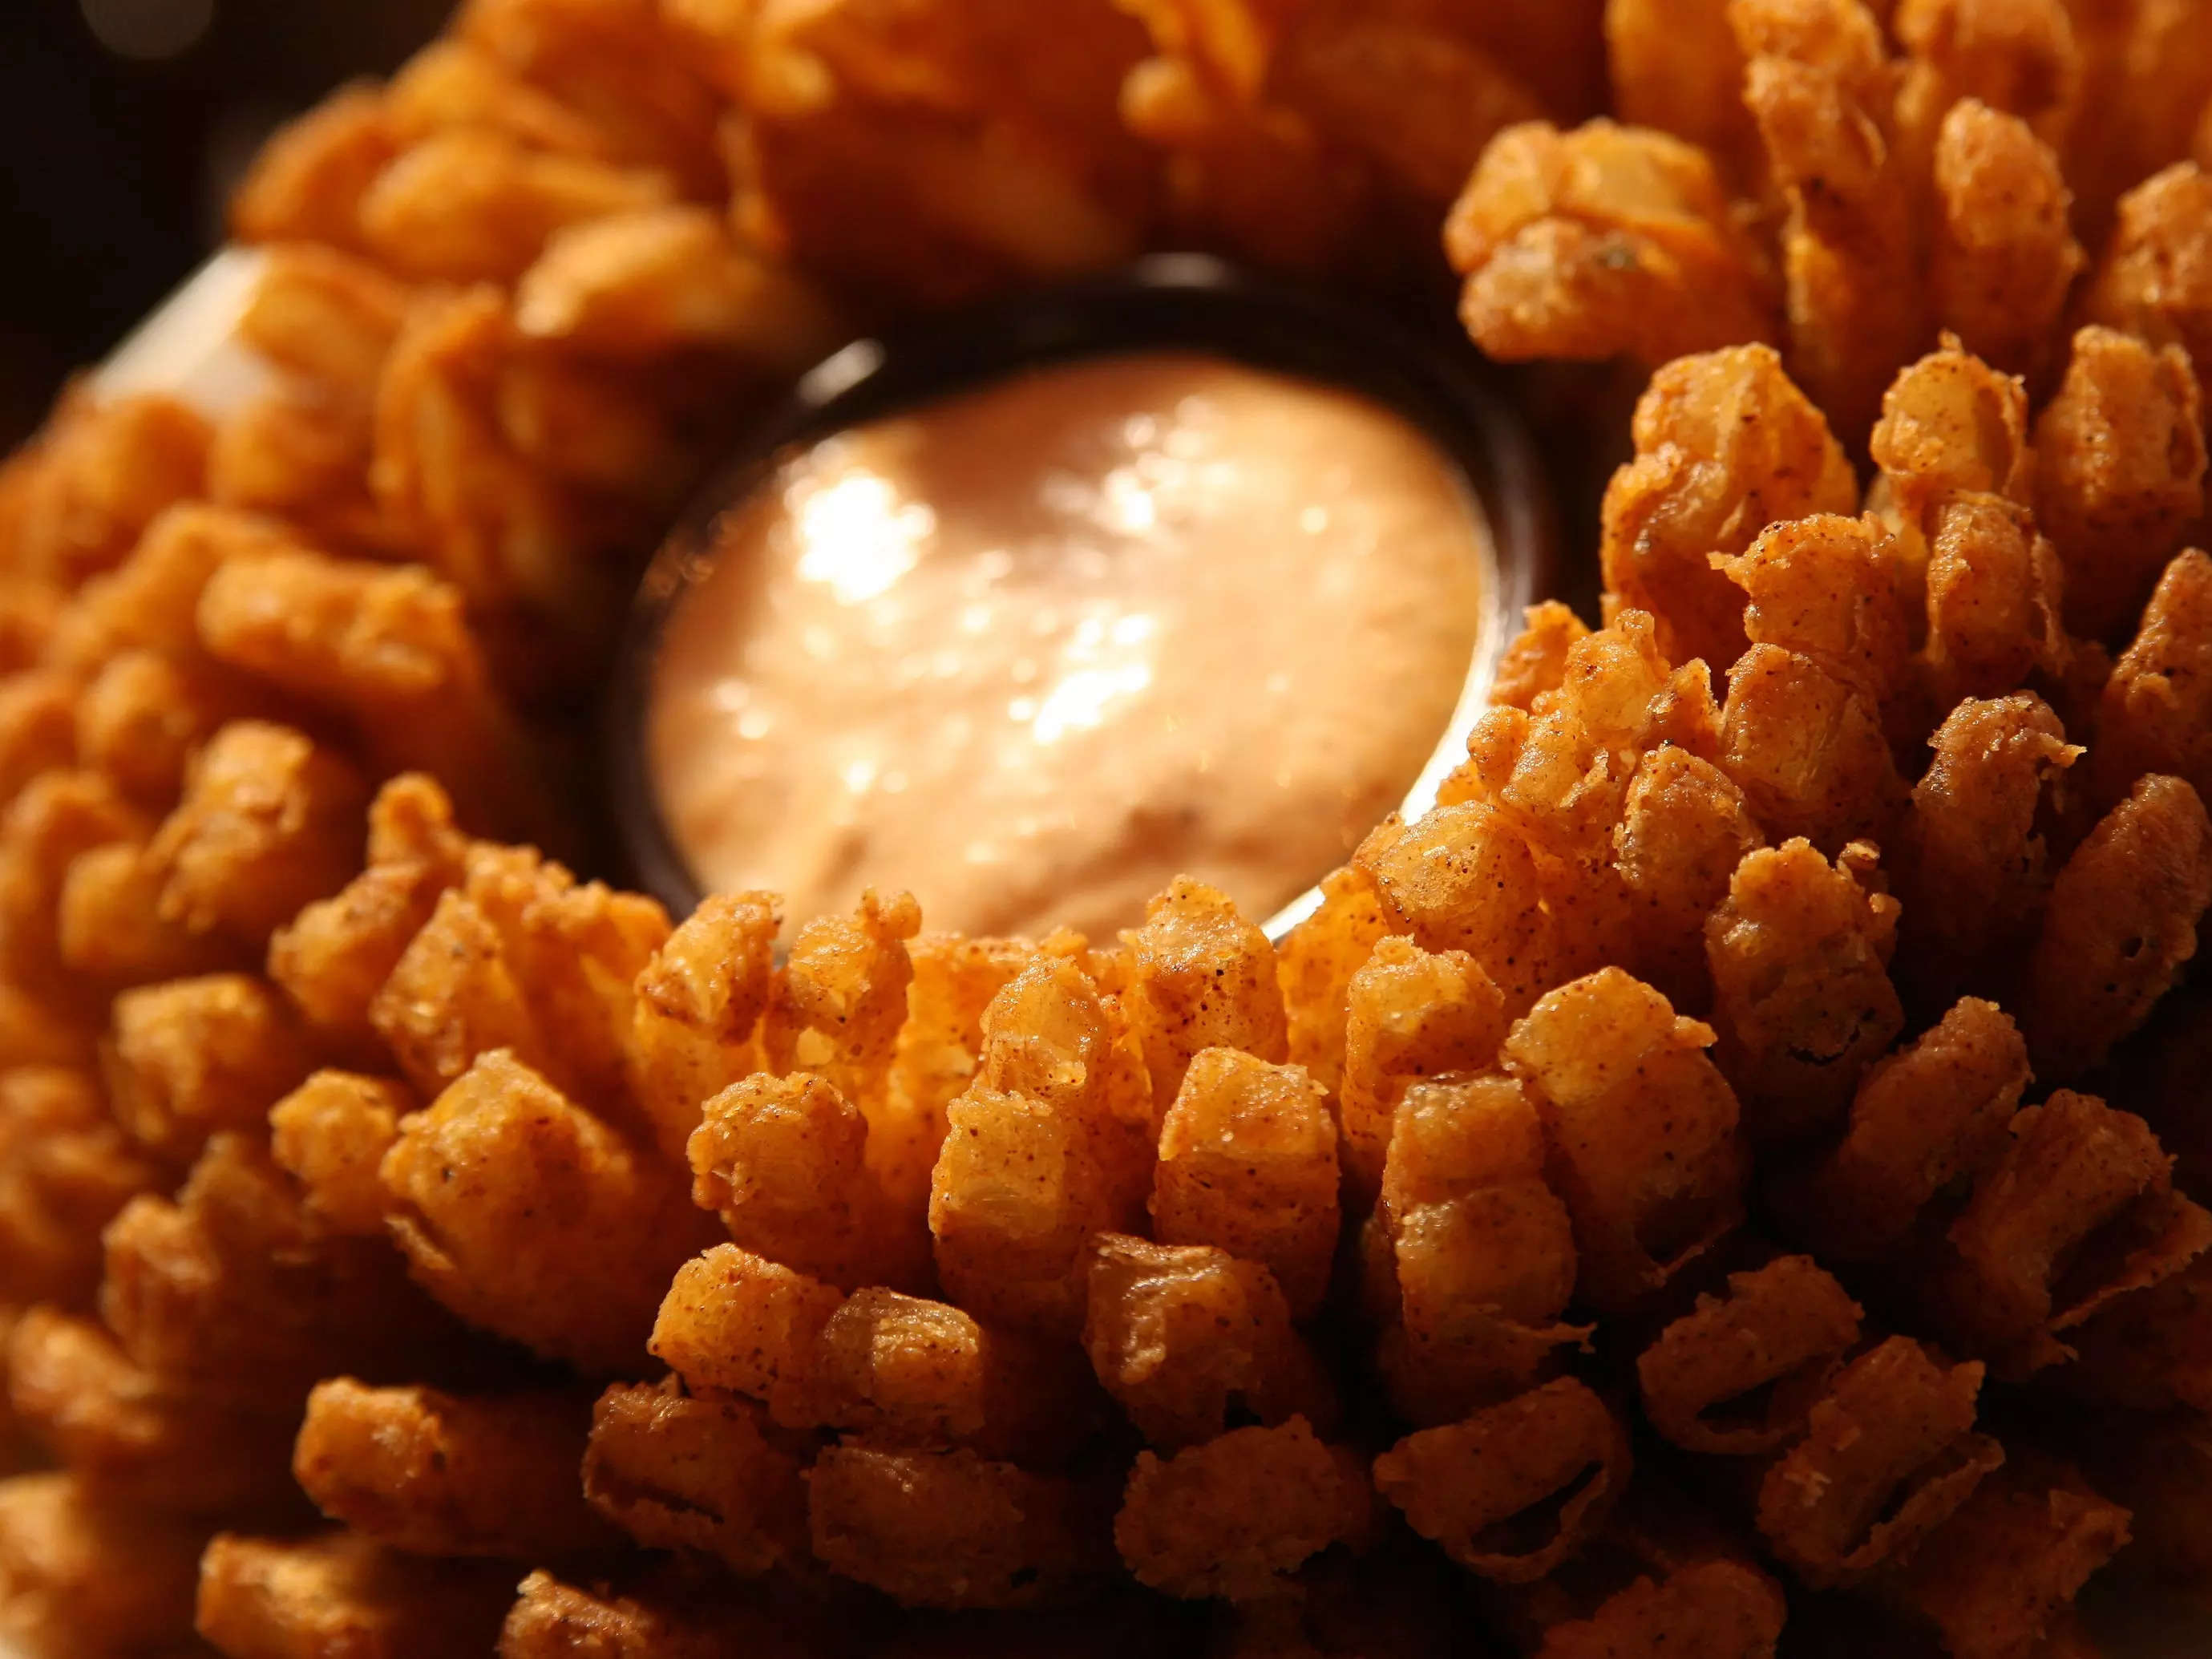 bloomin onion appetizer from outback steakhouse